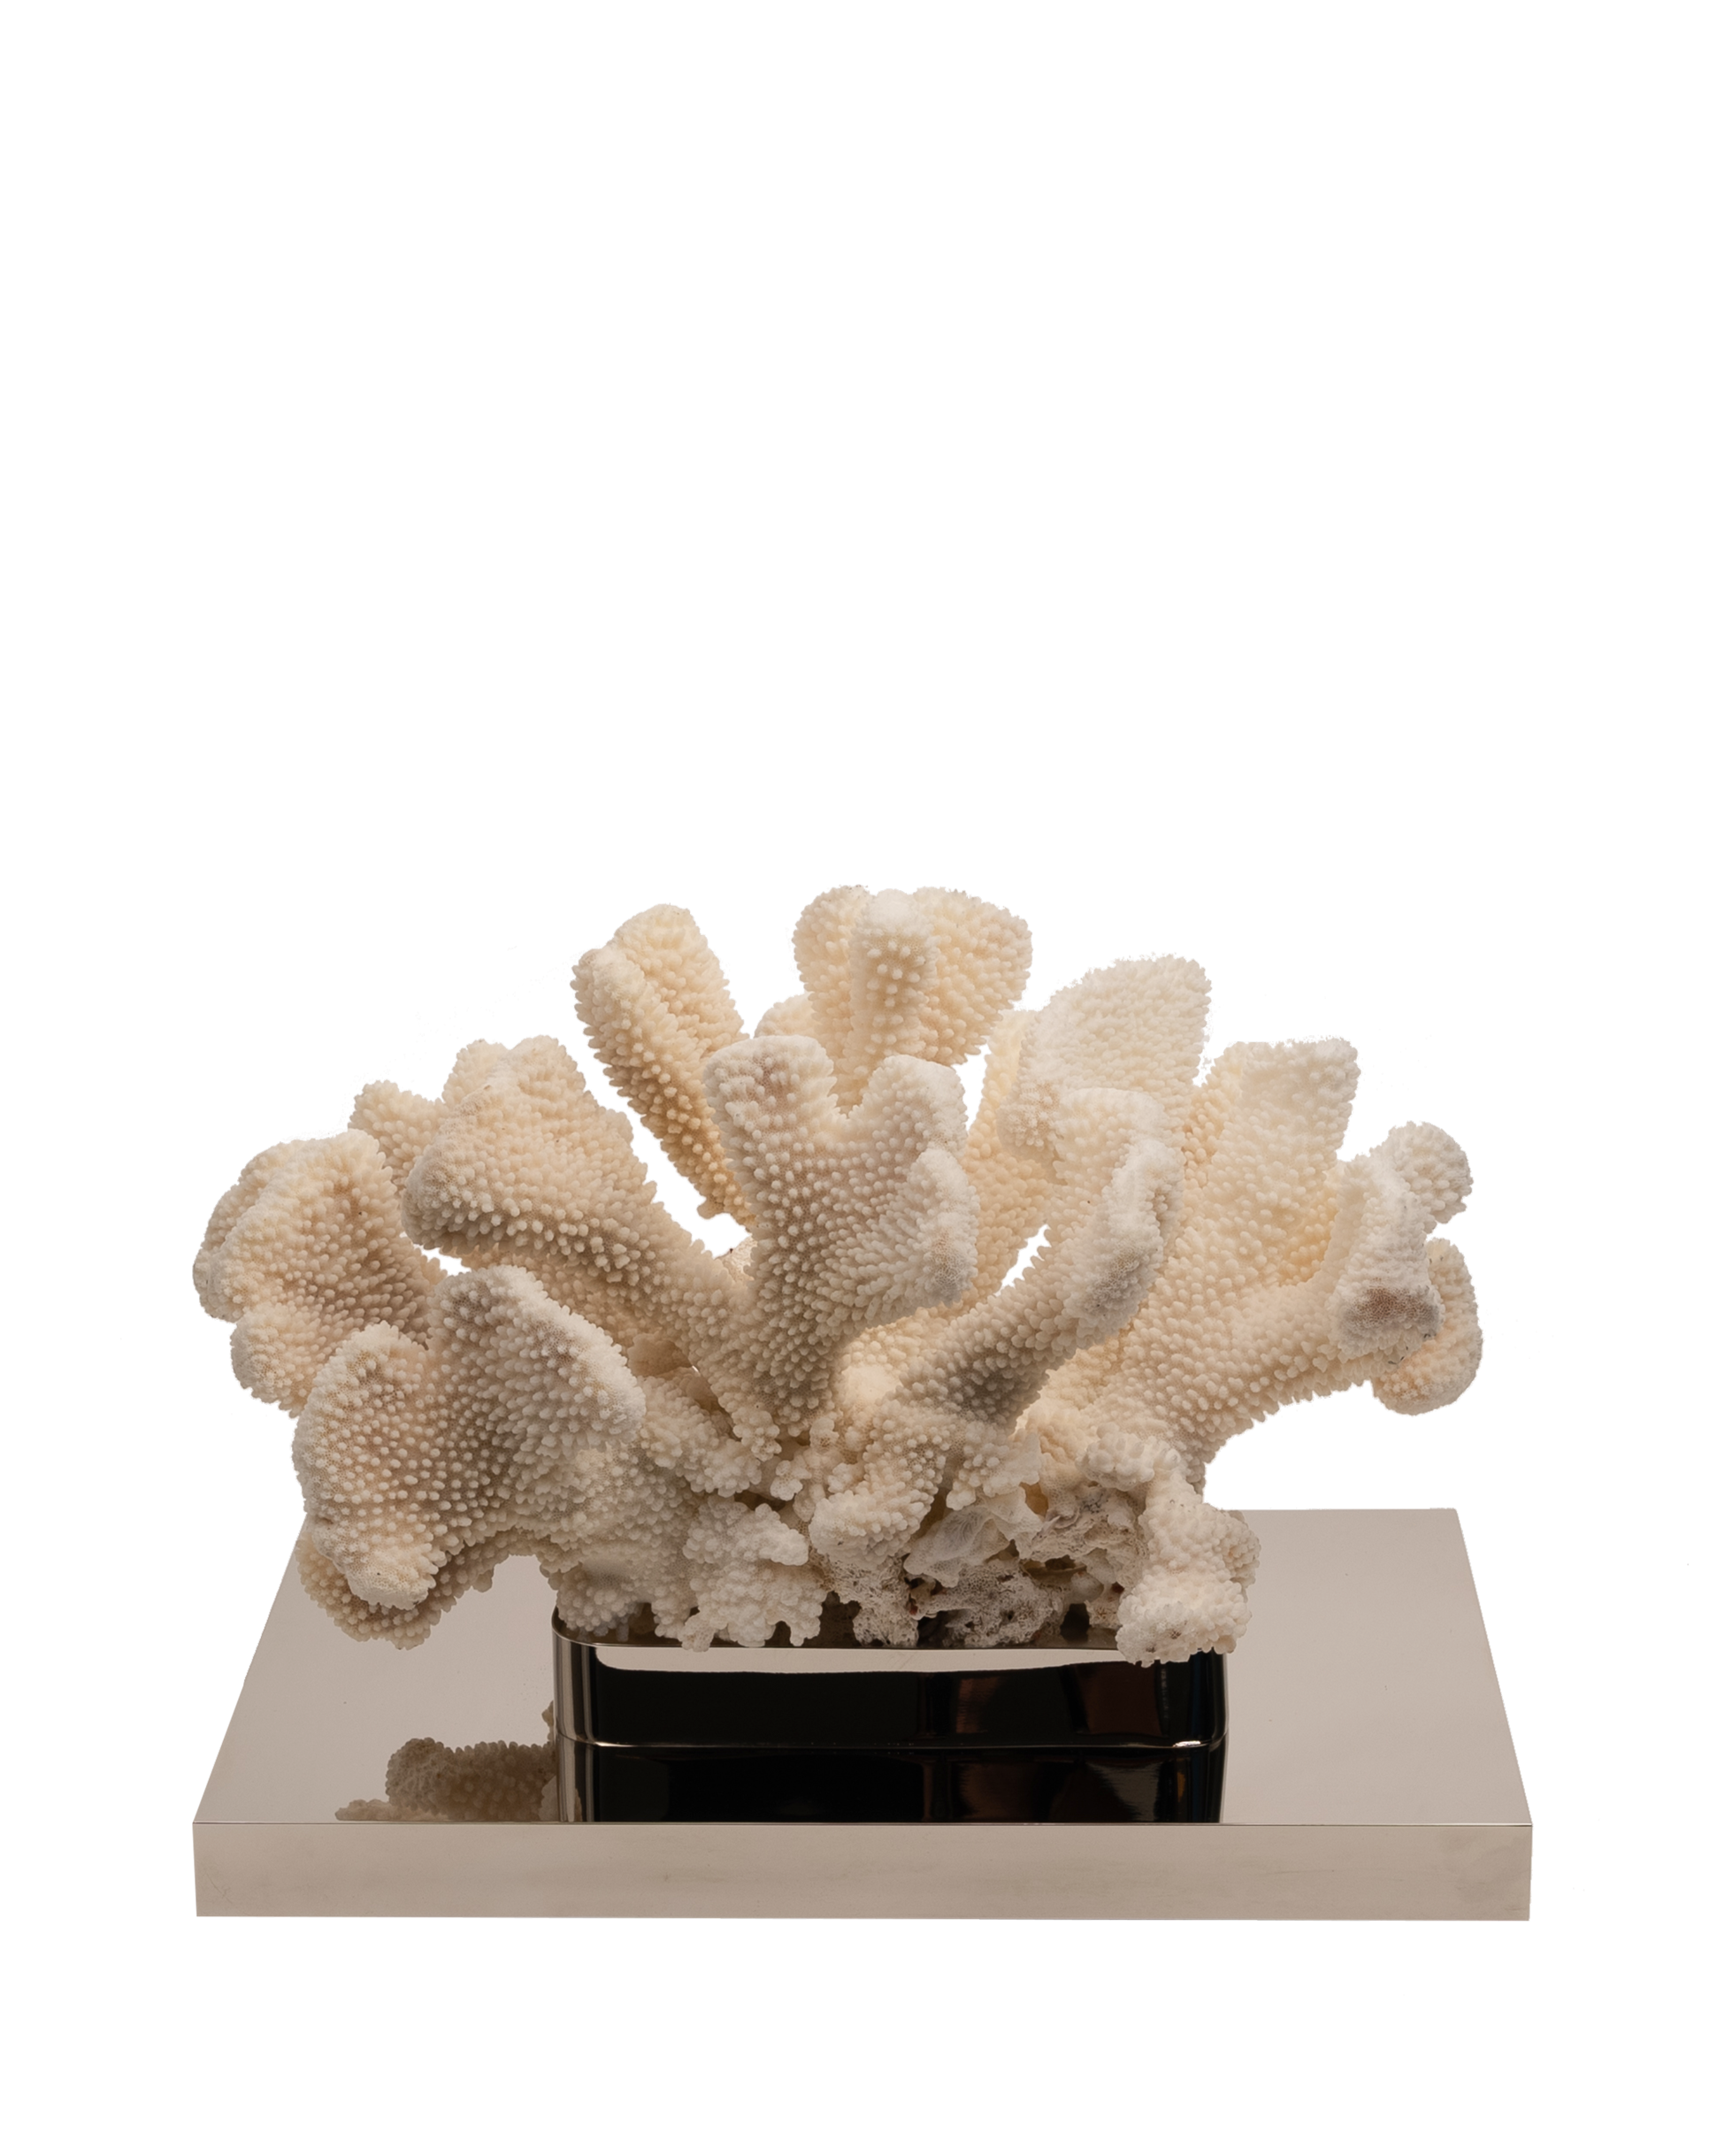 Petri- Coral Reef Table Sculpture on Nickel-Plated Base - Maison SIA